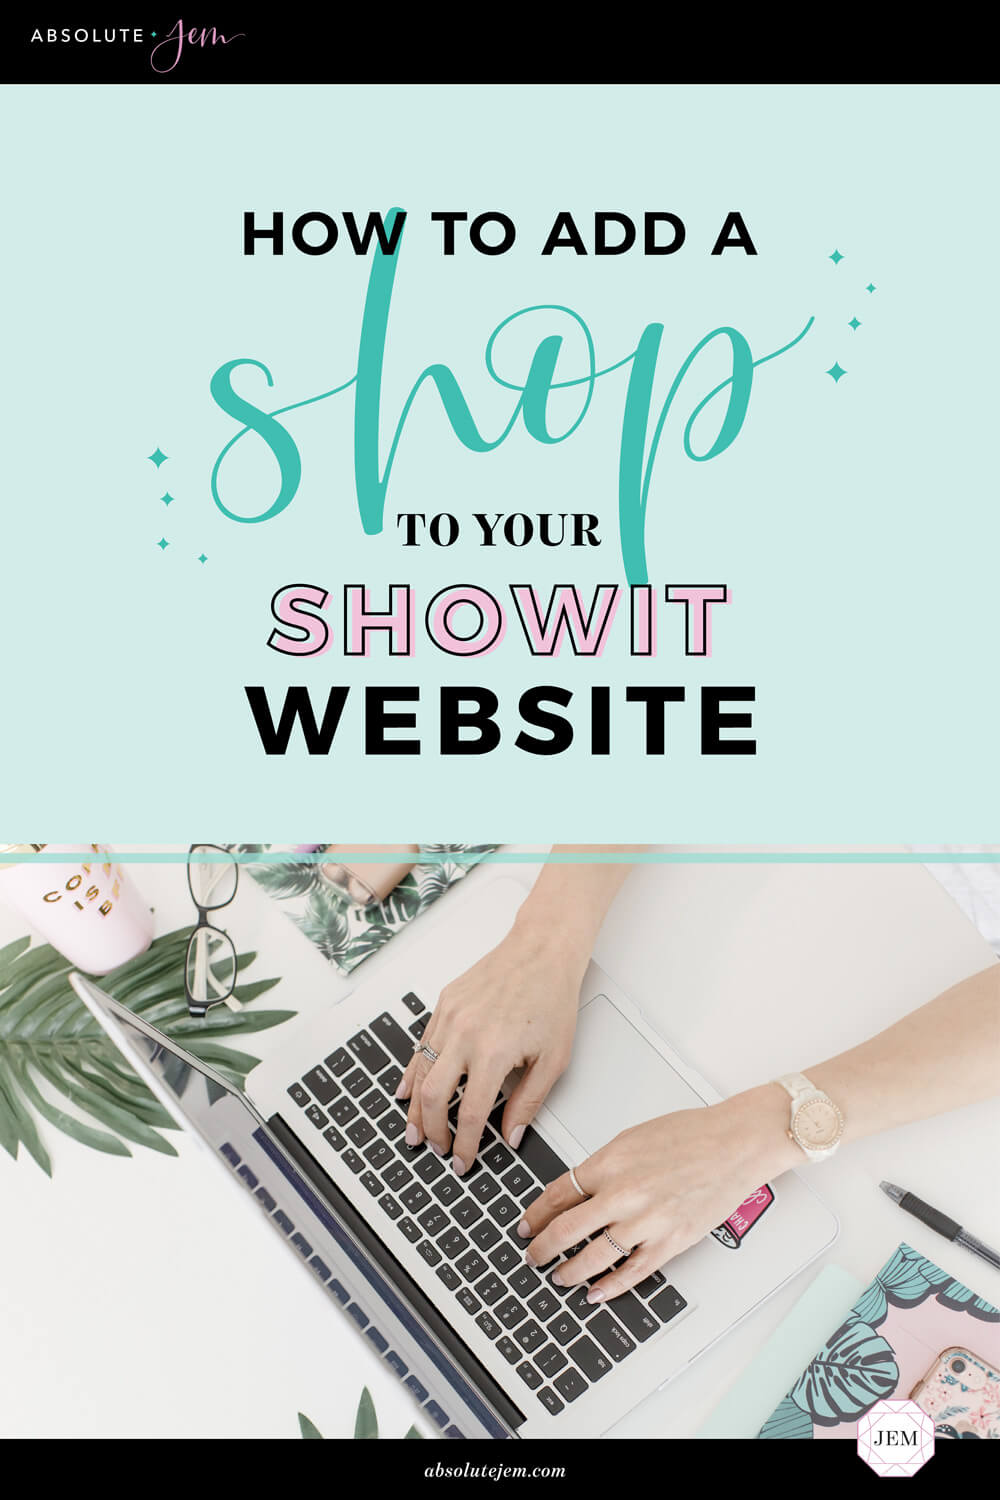 How To Add A Shop To Your Showit Website With Shopify Lite | Absolute JEM Blog